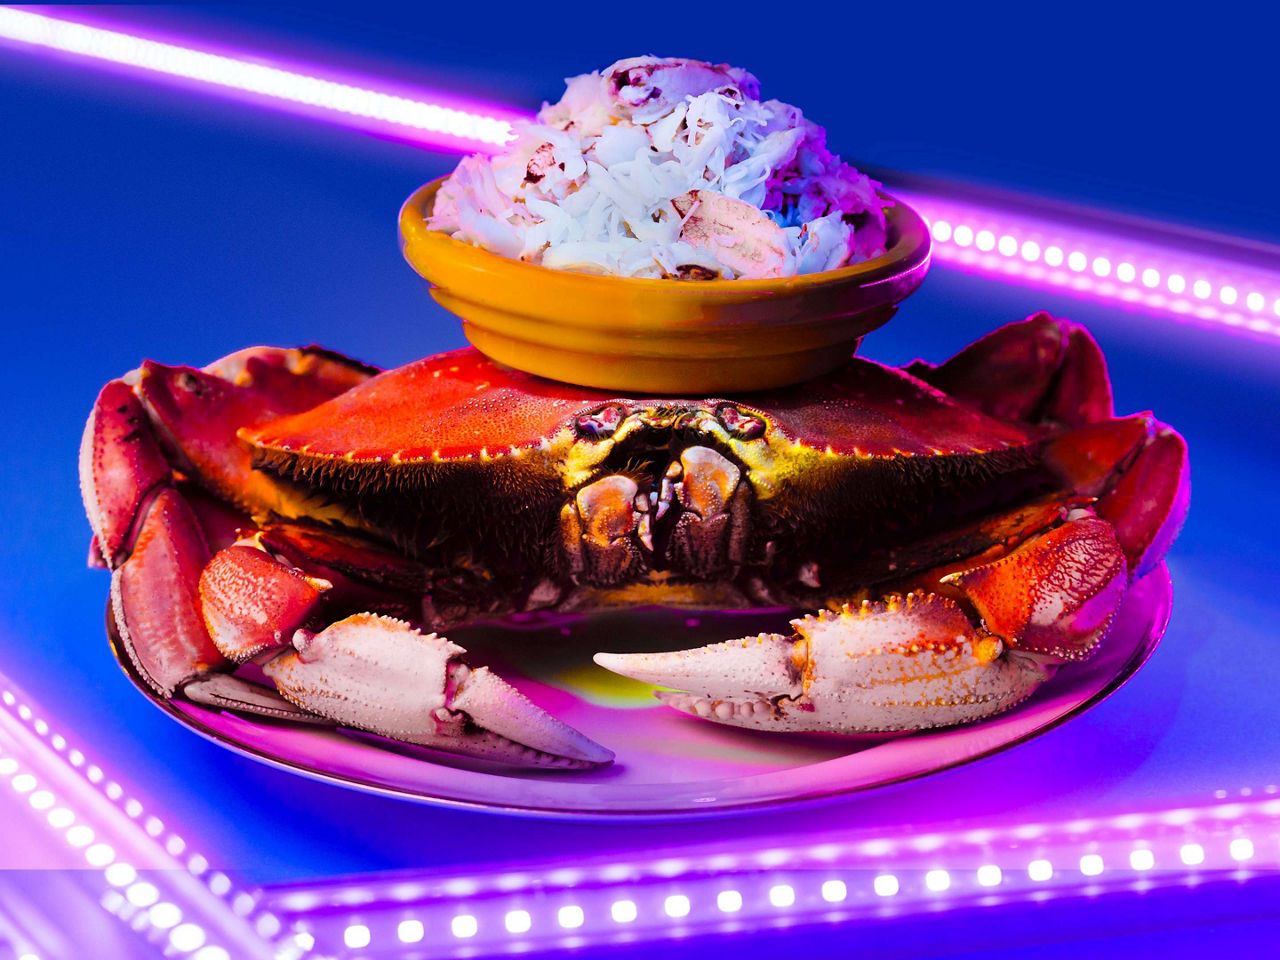 Tips & Tricks: The Rave-Worthy Secret to Perfectly Picked Crab